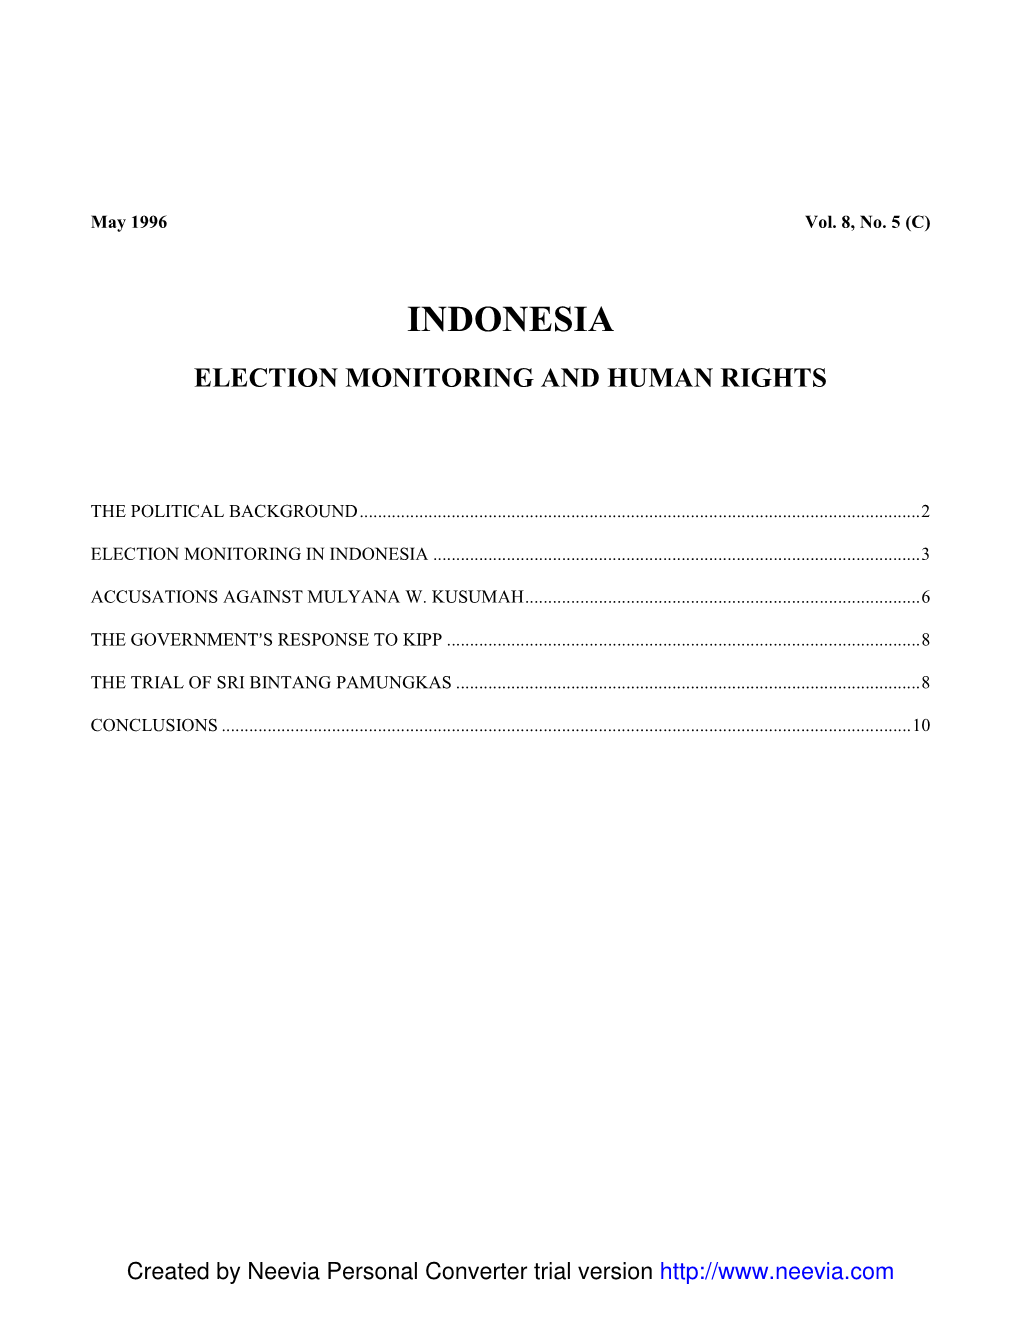 Indonesia Election Monitoring and Human Rights